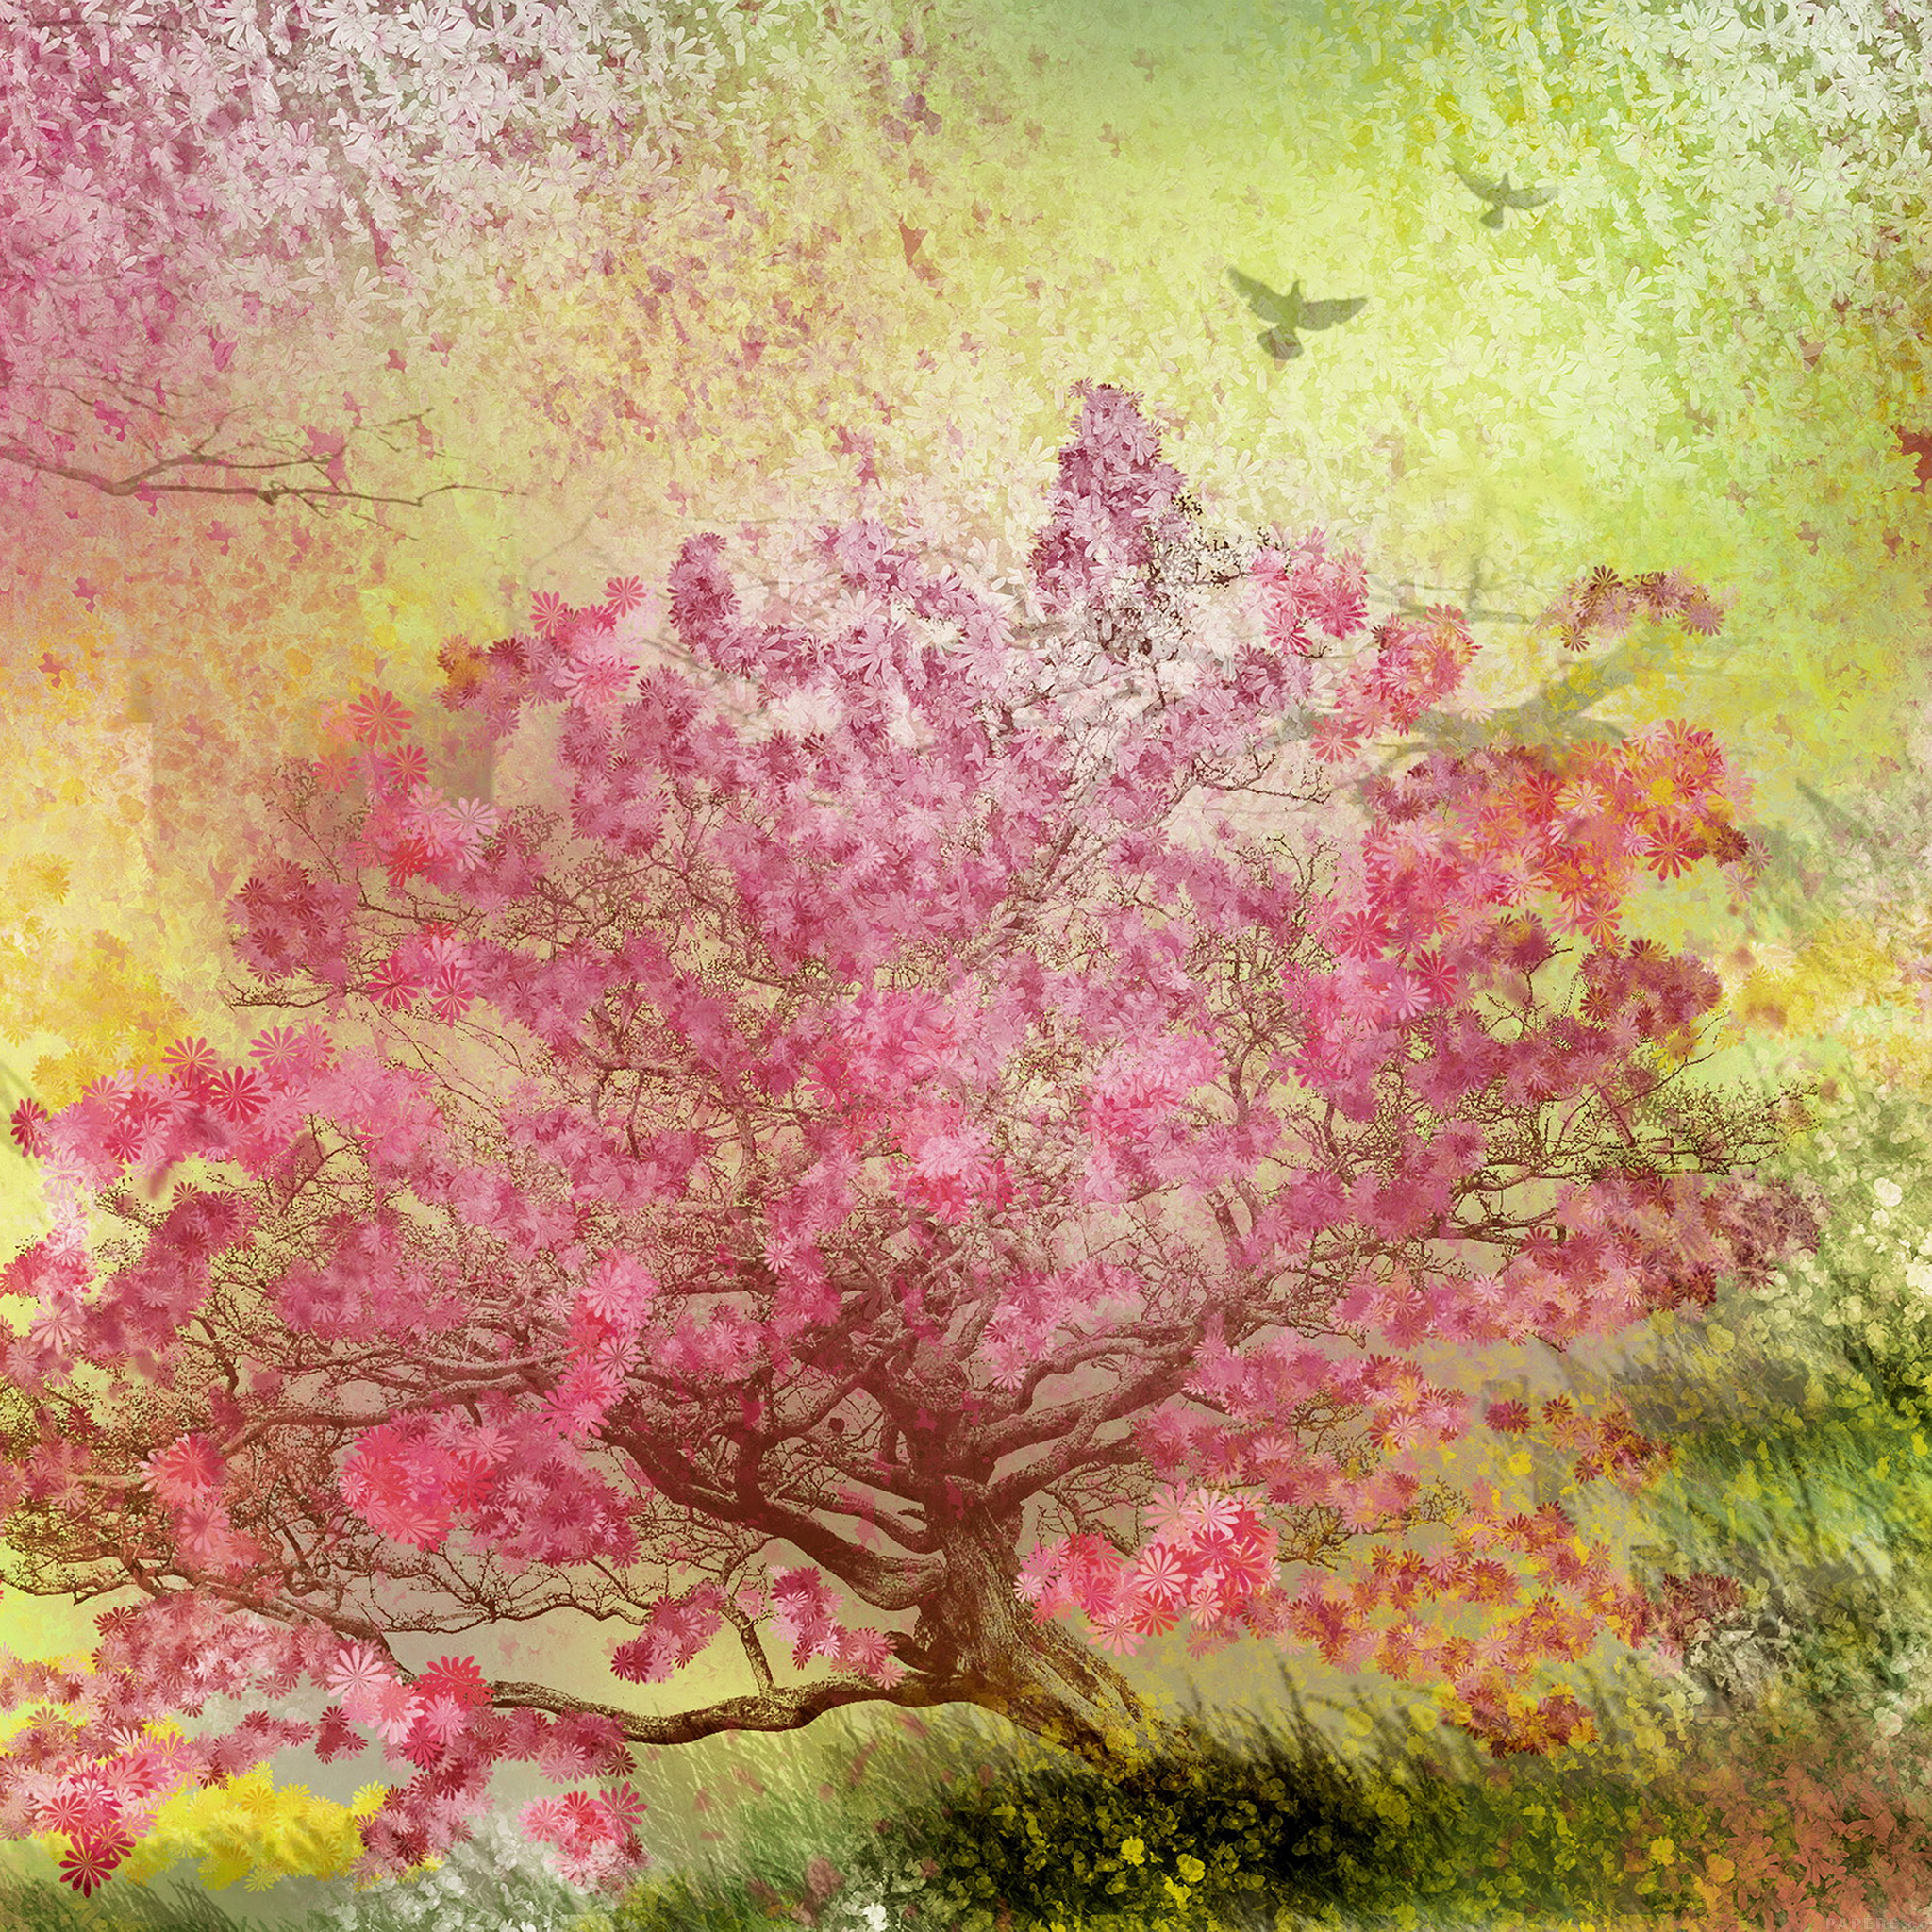 Nature Spring Blossom Trees iPad Air Wallpaper Download. iPhone